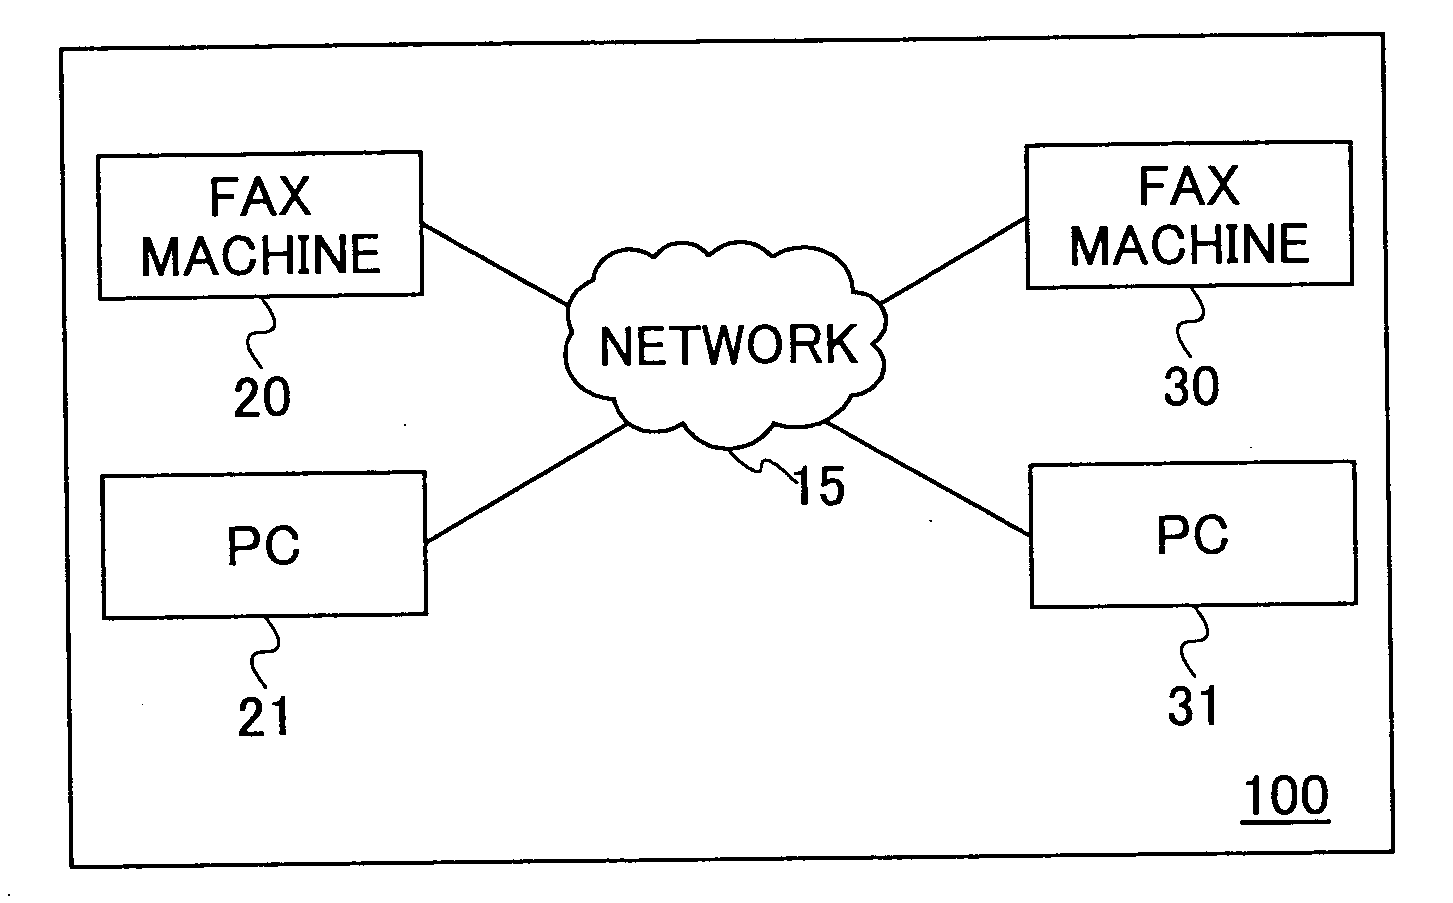 Network facsimile machine with improved usability